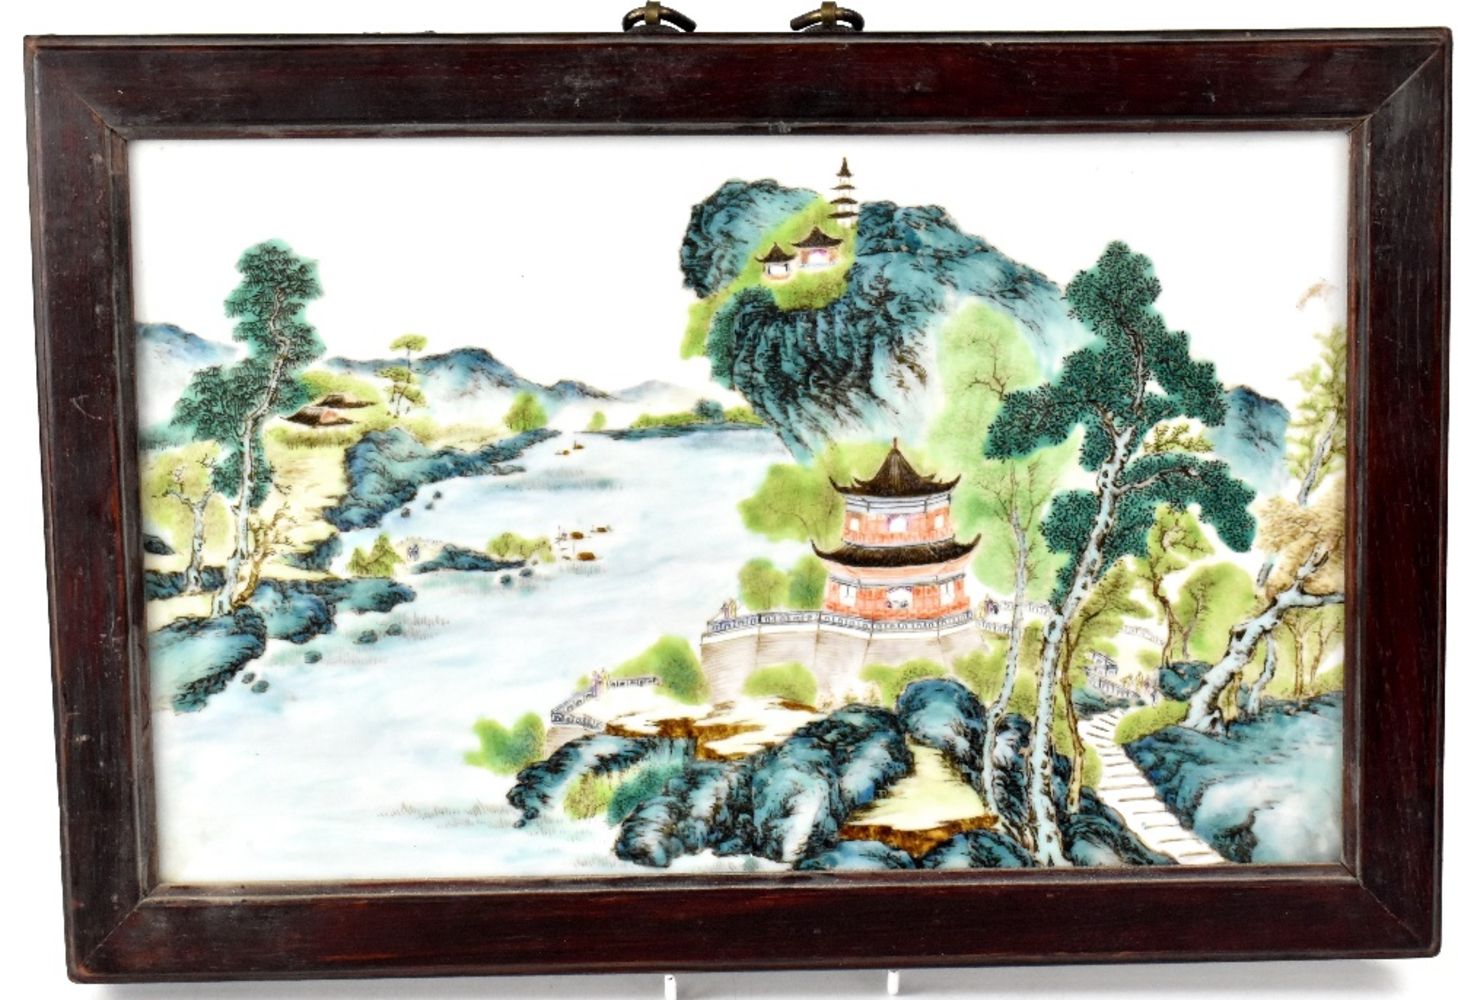 Asian Art with Antiques & Collectors’ Items